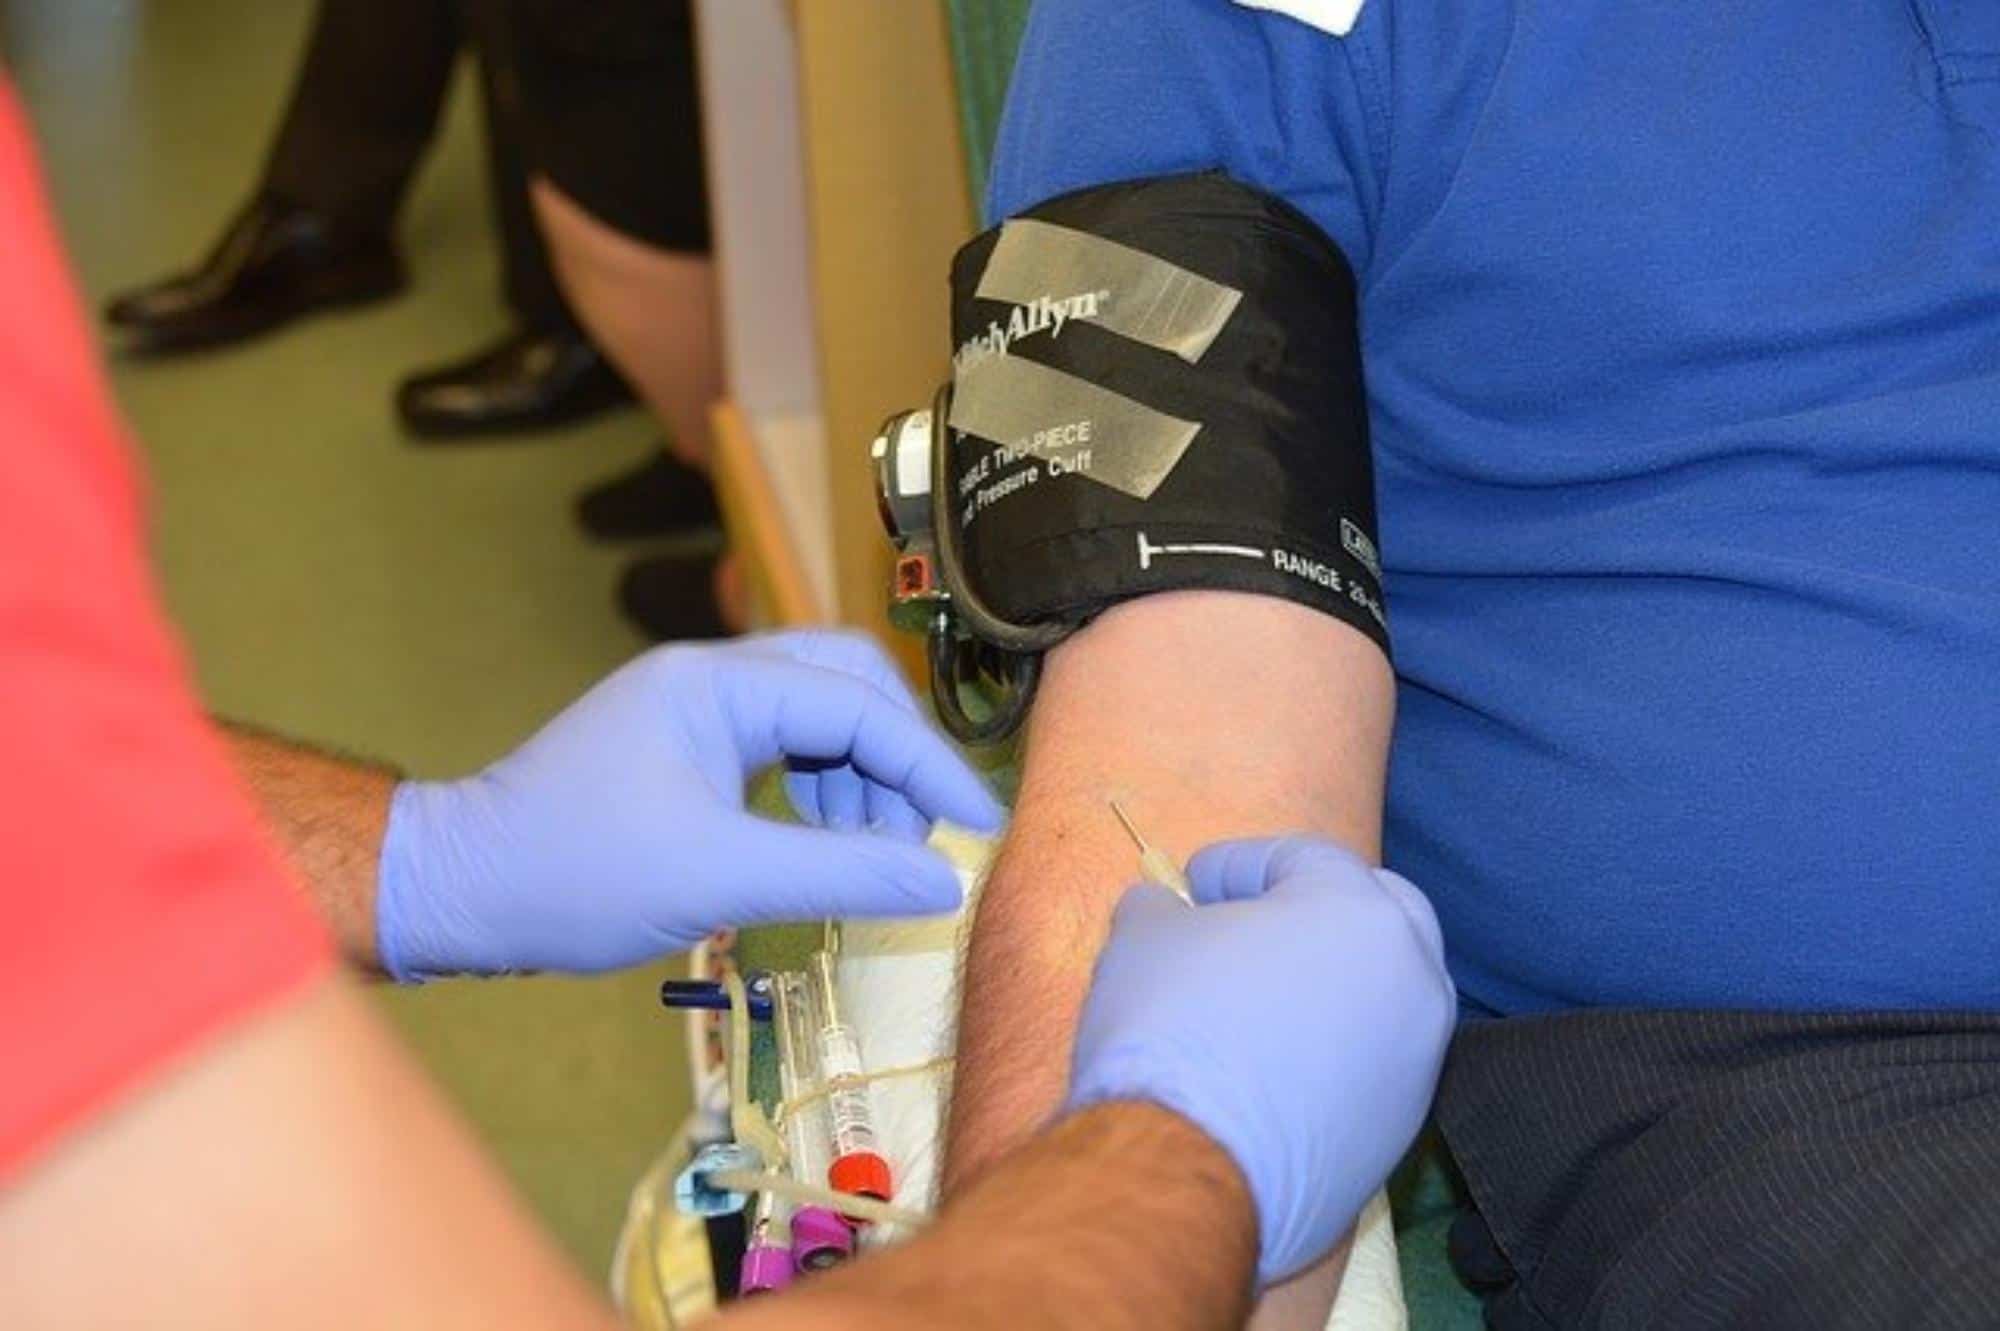 Donating blood benefits you and others